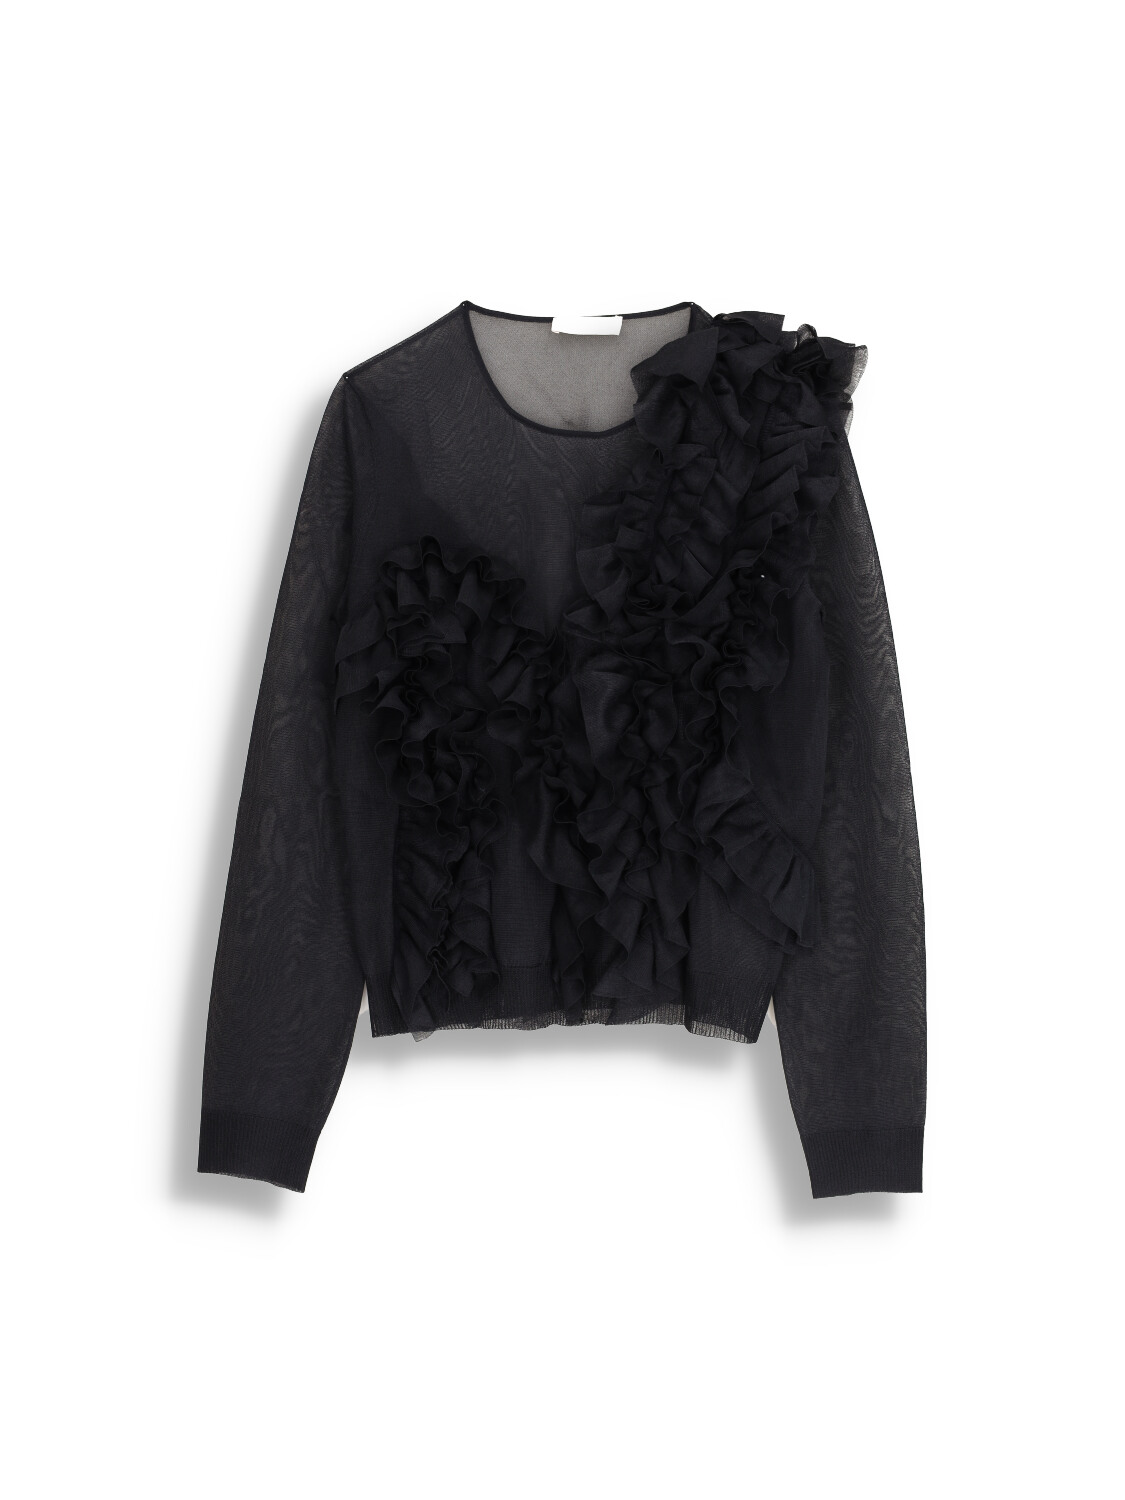 Theodora - Transparent blouse with ruffle details